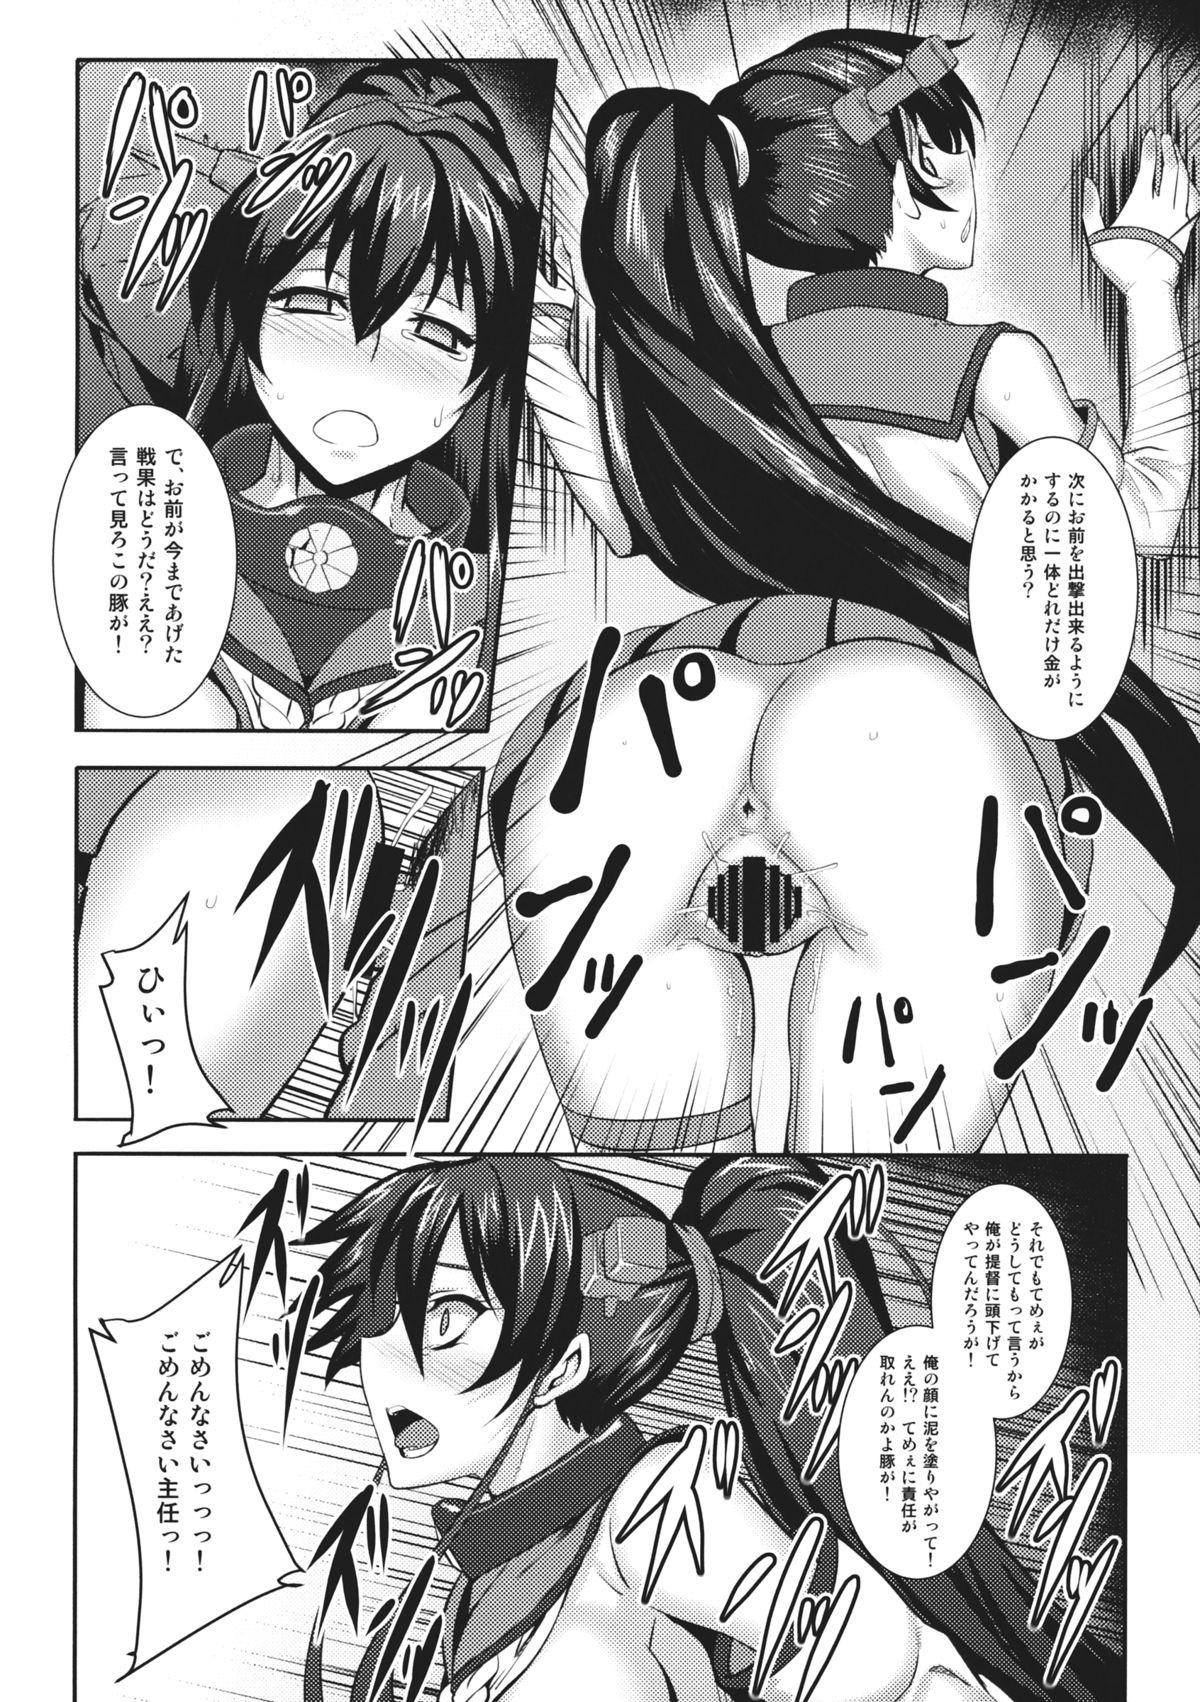 Socks the Dark Blue Moon - Kantai collection Buttfucking - Page 11